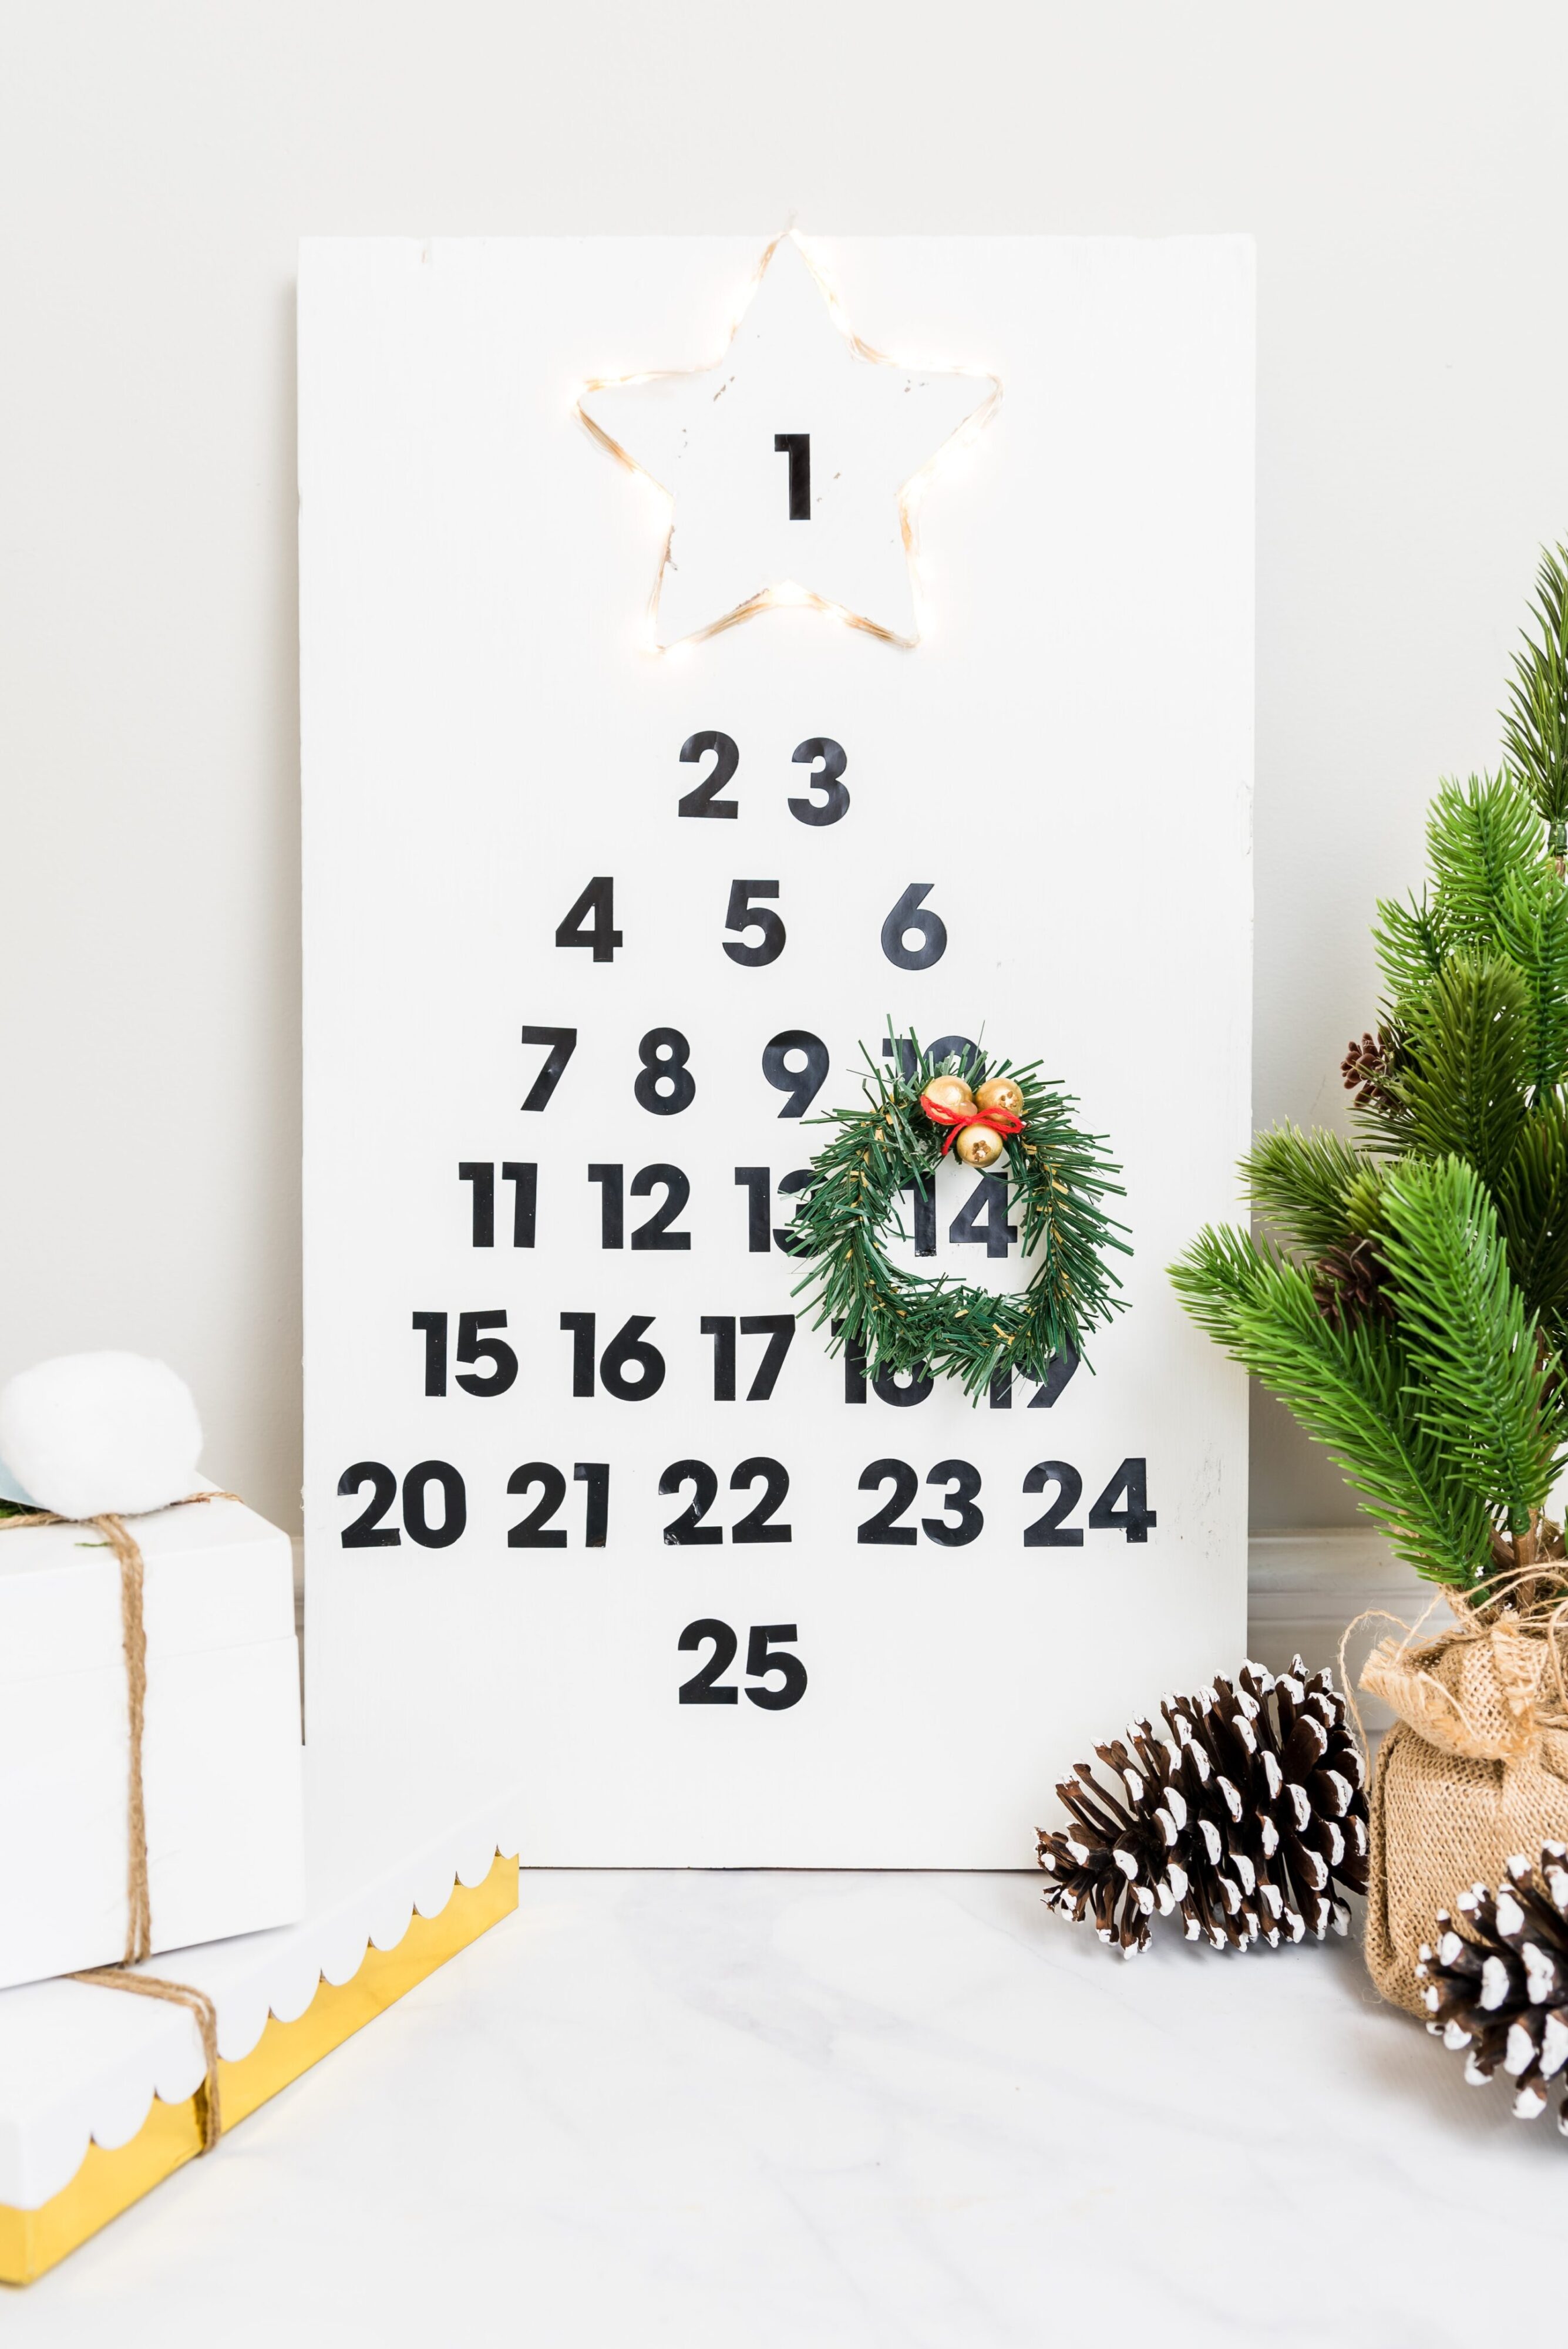 This easy DIY wooden advent calendar is such a simple project, even the kids can help